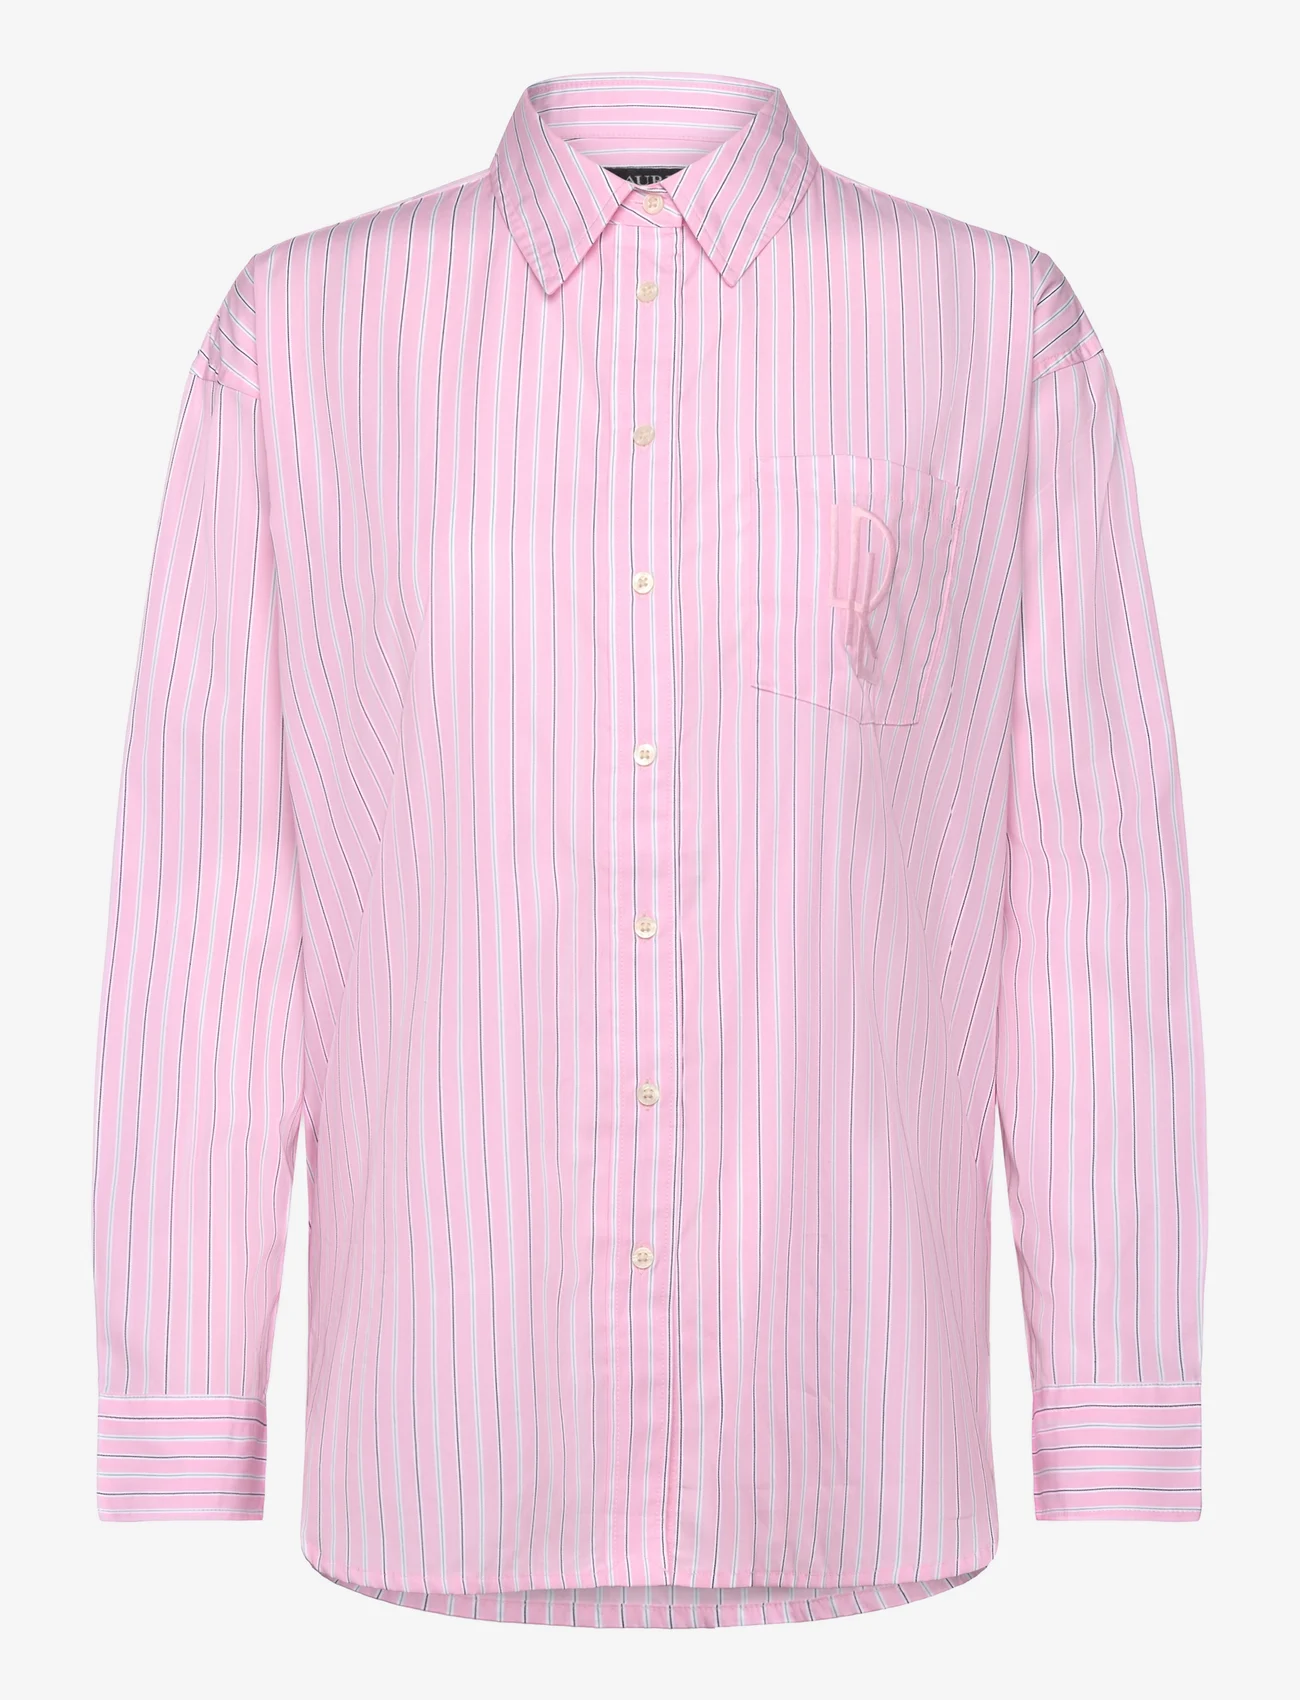 Lauren Ralph Lauren - Relaxed Fit Striped Broadcloth Shirt - long-sleeved shirts - pink/white multi - 0